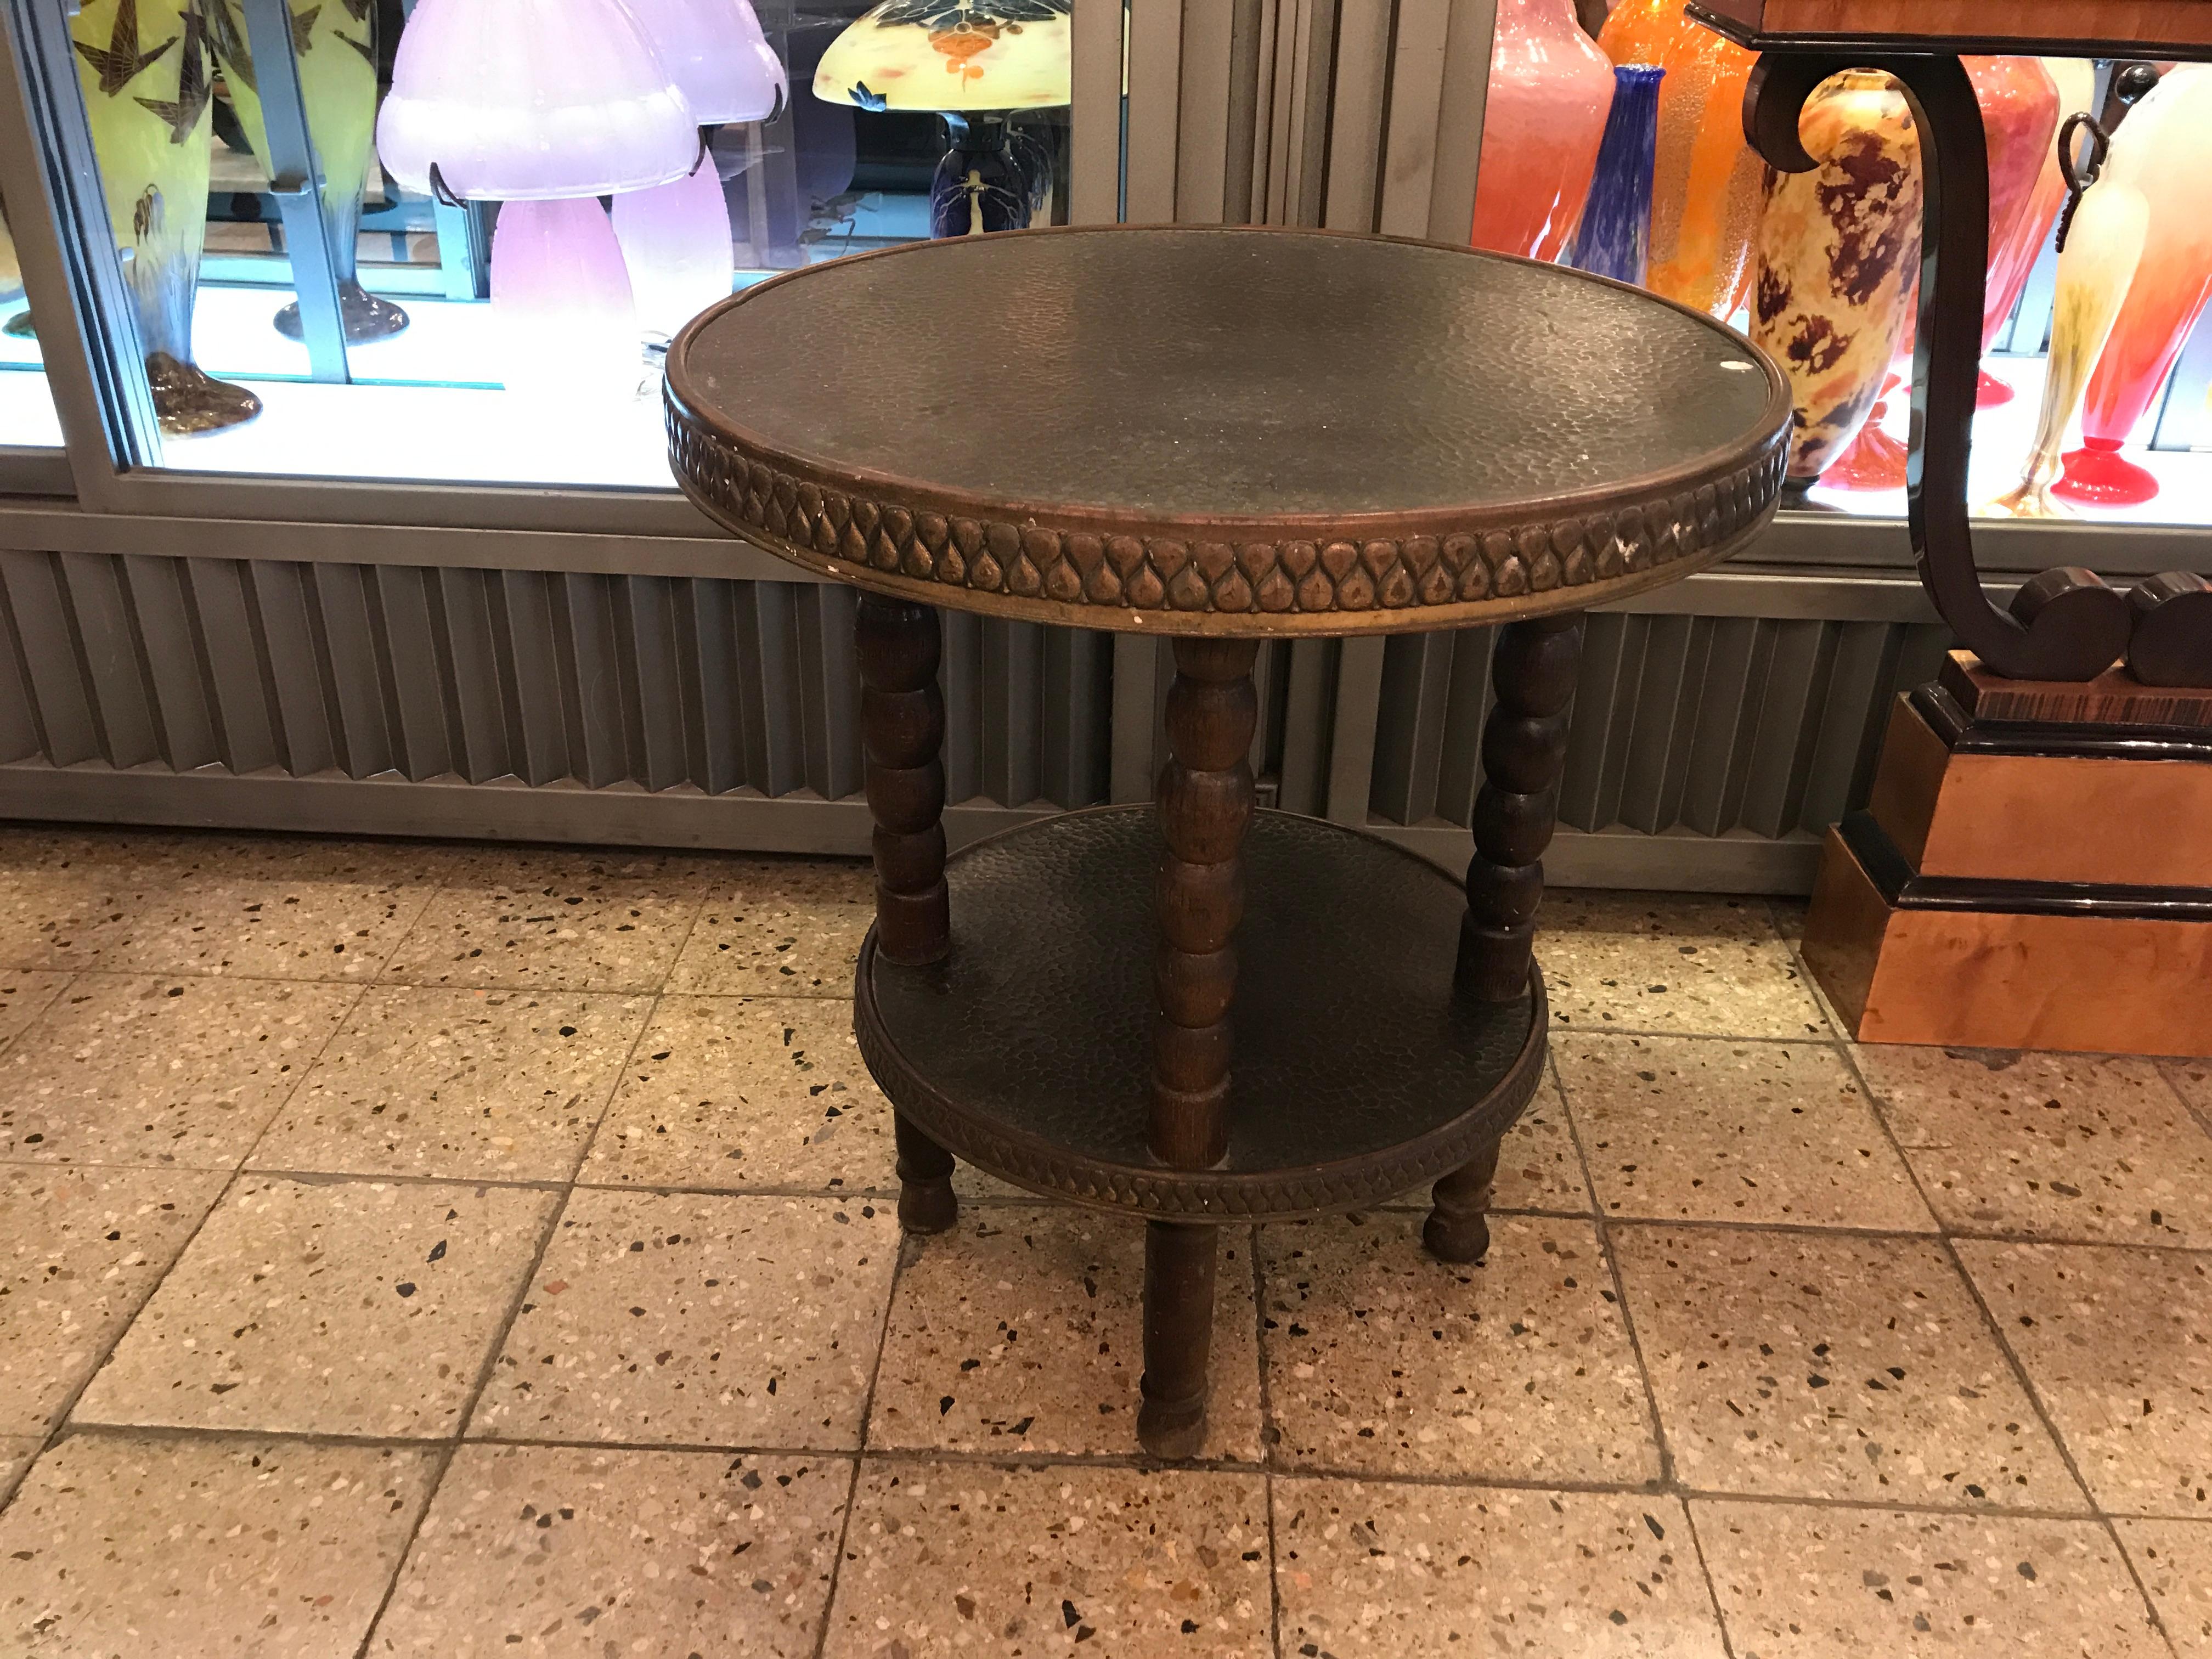 Table vienna Secession

Material: wood and bronze
Style: Vienna Secession
Country: Vienna
We have specialized in the sale of Art Deco and Art Nouveau and Vintage styles since 1982. If you have any questions we are at your disposal.
Pushing the